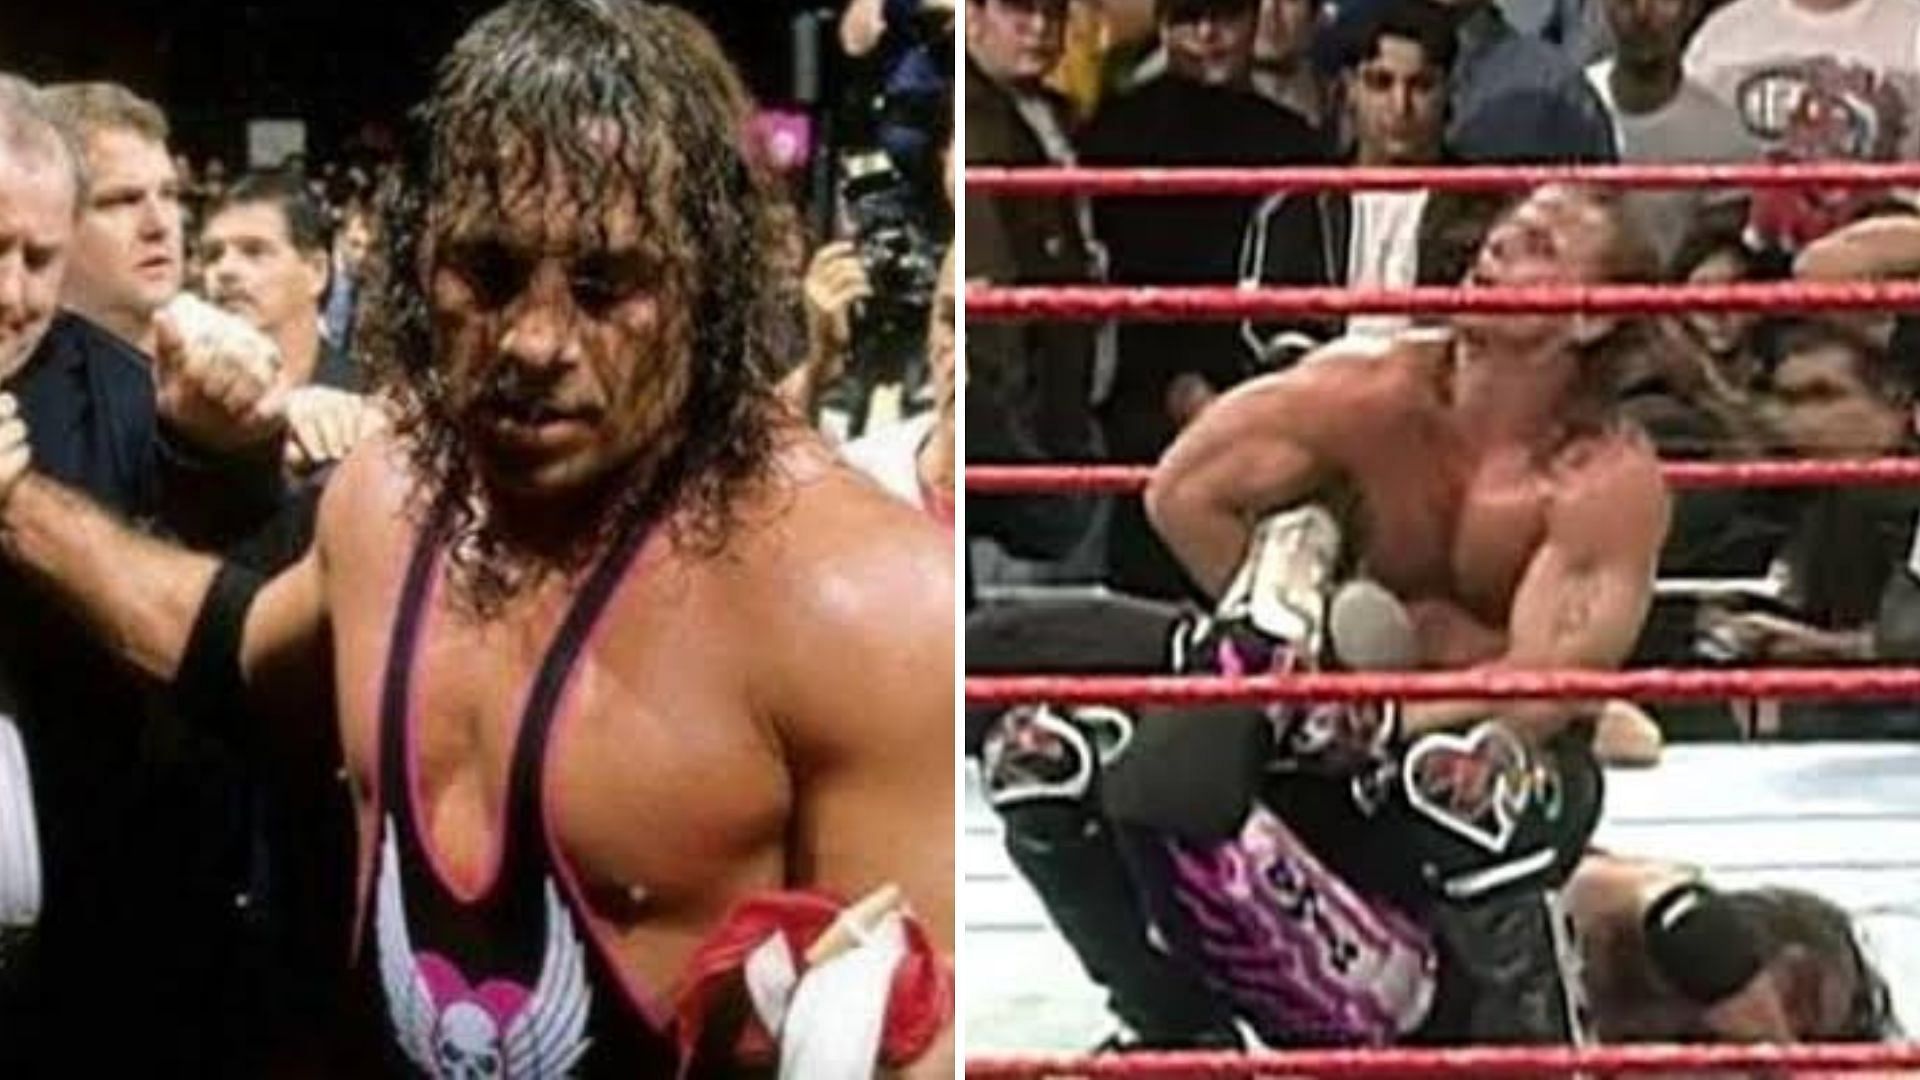 Russo witnessed the Montreal Screwjob go down from closed doors.